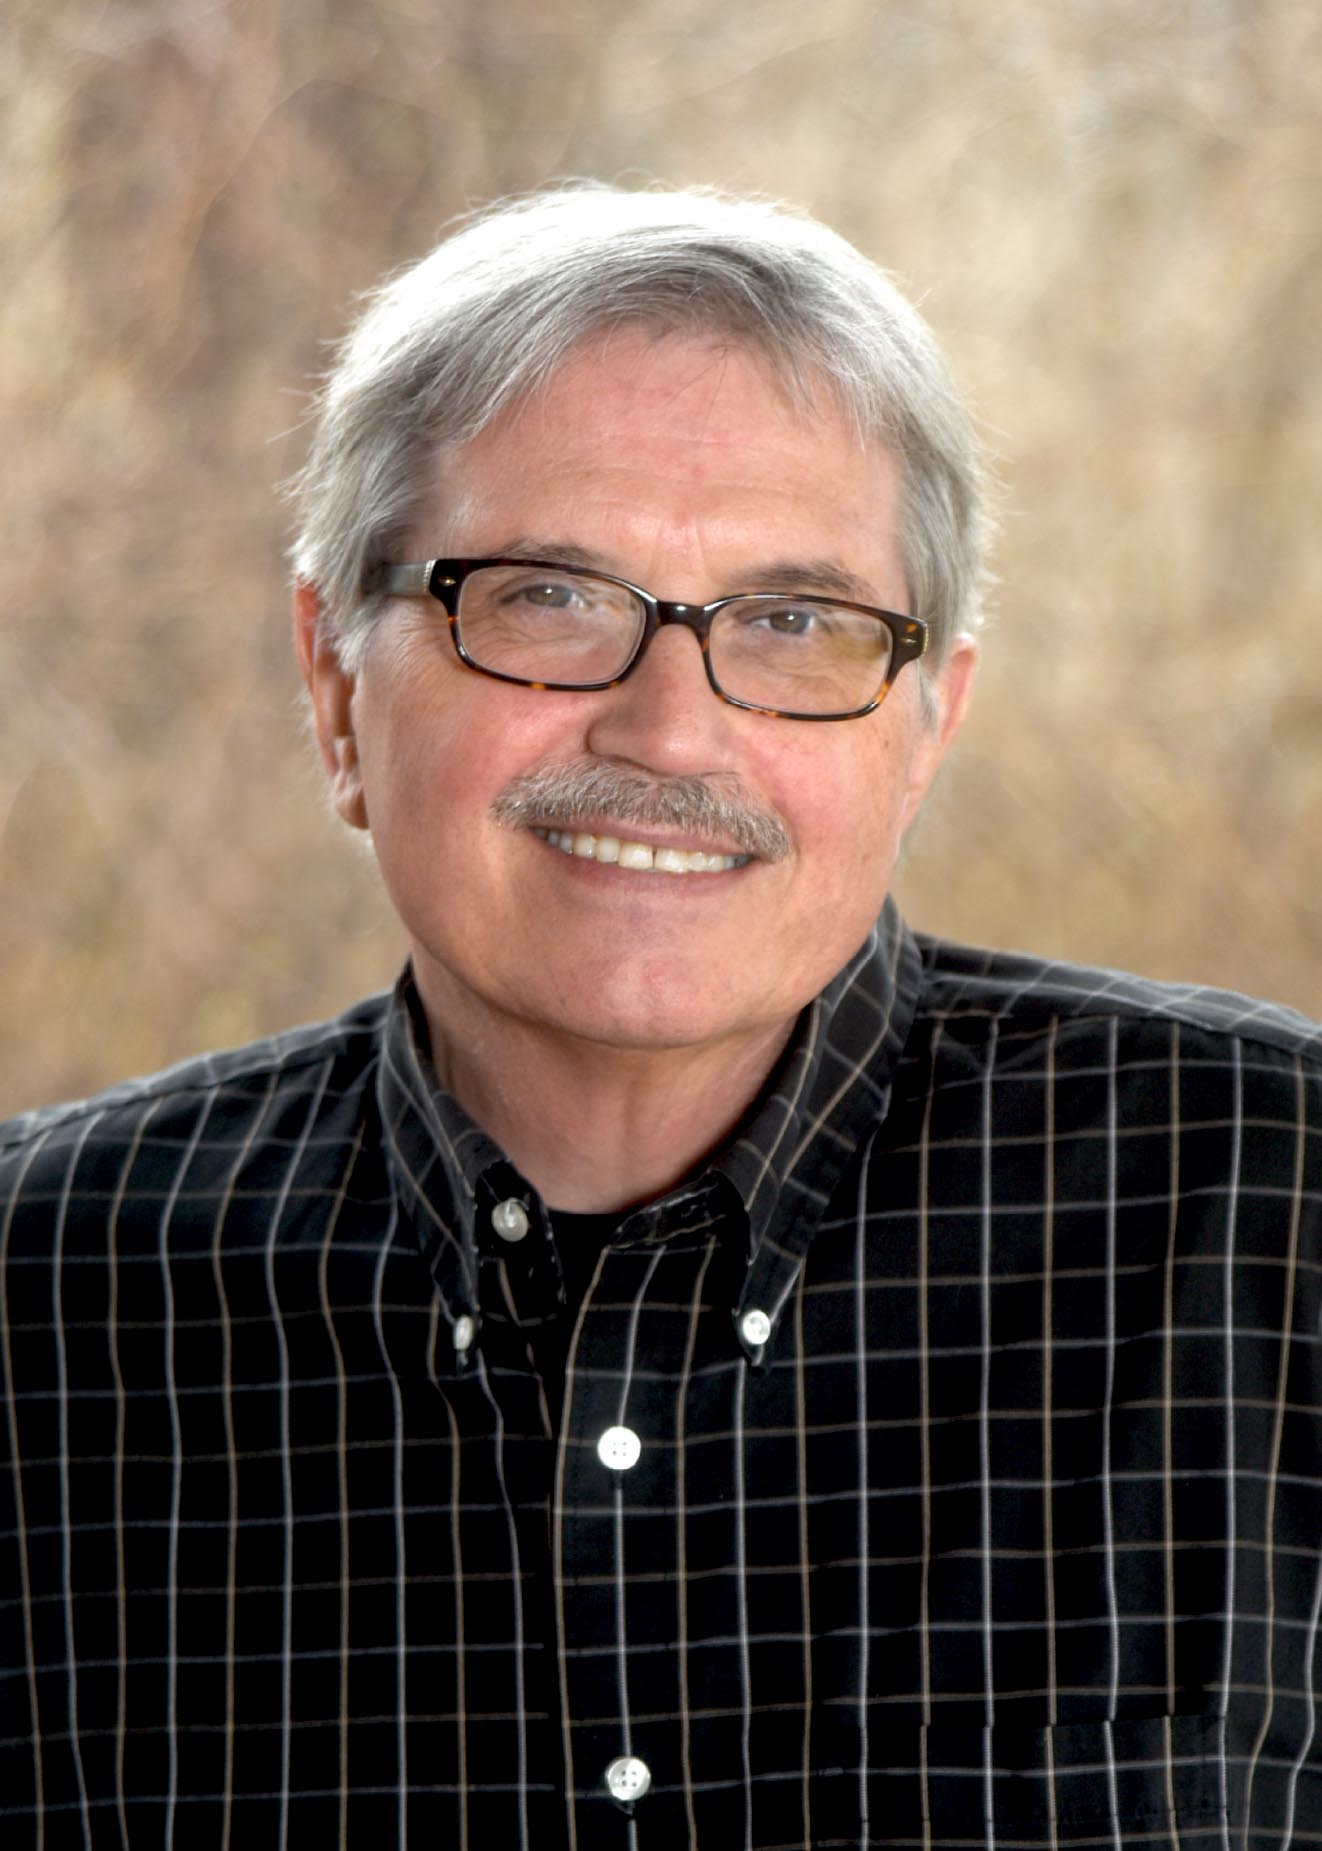 Ken Gingerich retired from his role as art director for Mennonite Church USA’s Executive Board staff in June 2016.